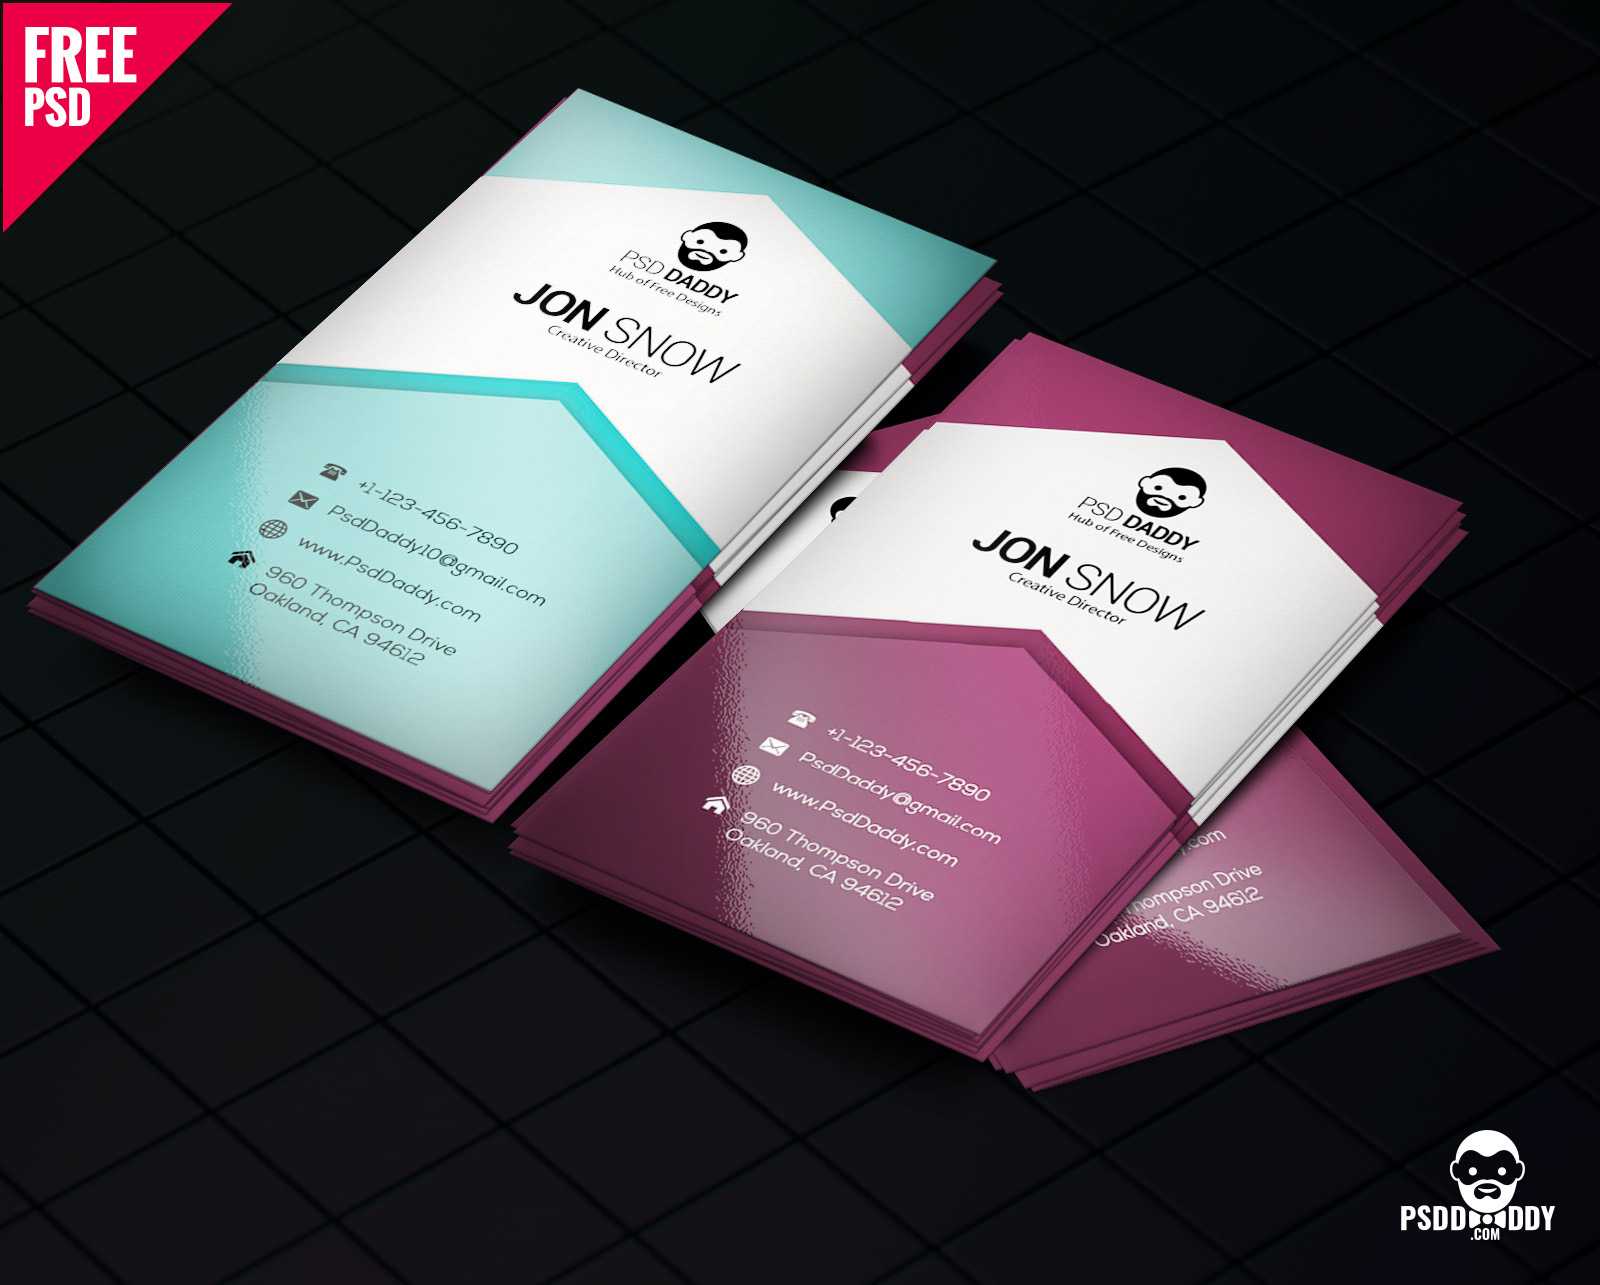 Download]Creative Business Card Psd Free | Psddaddy For Visiting Card Templates For Photoshop